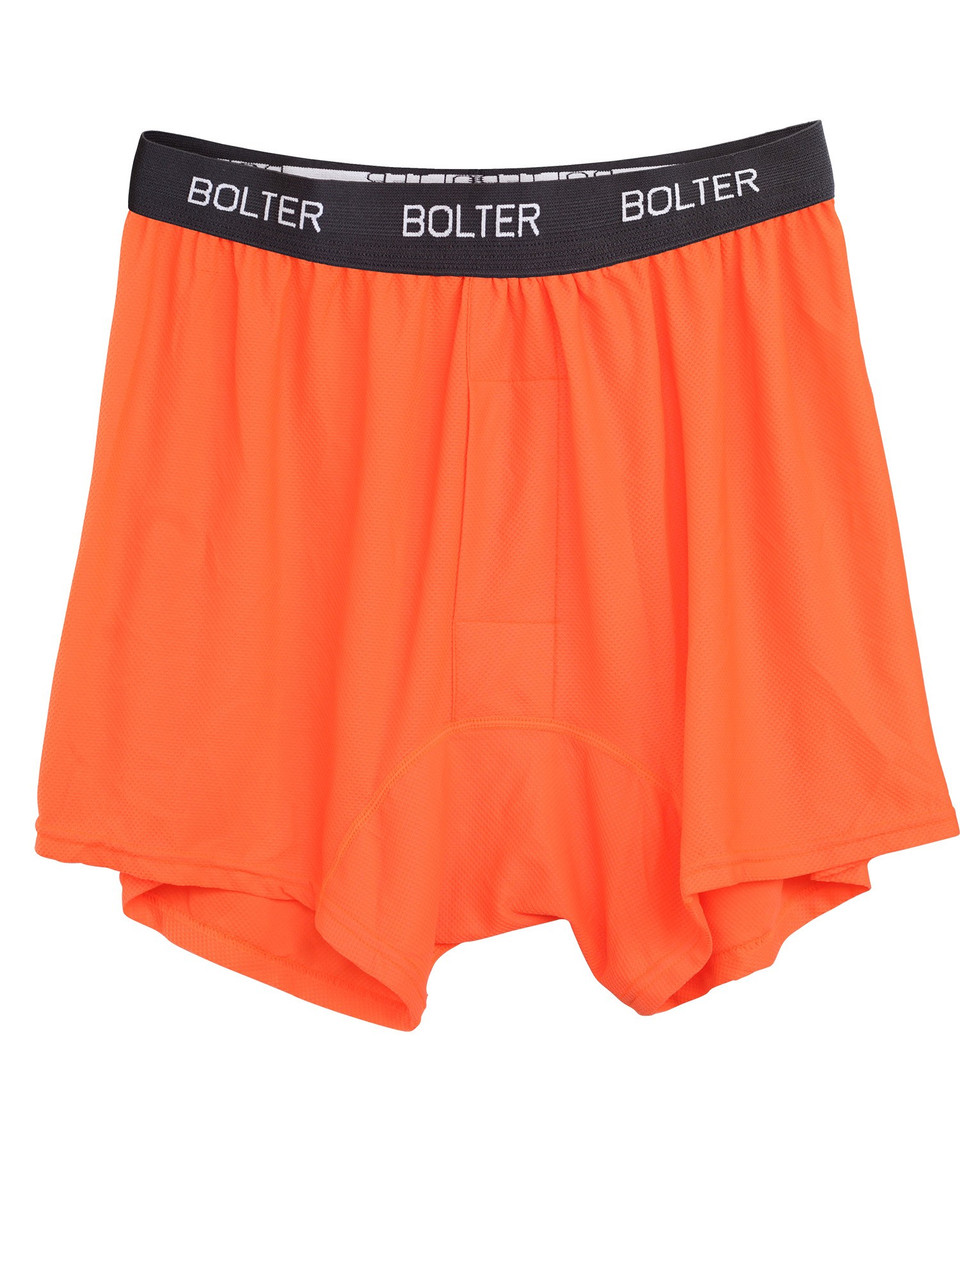 Performance Boxers Shorts Bolter - 4 Pack